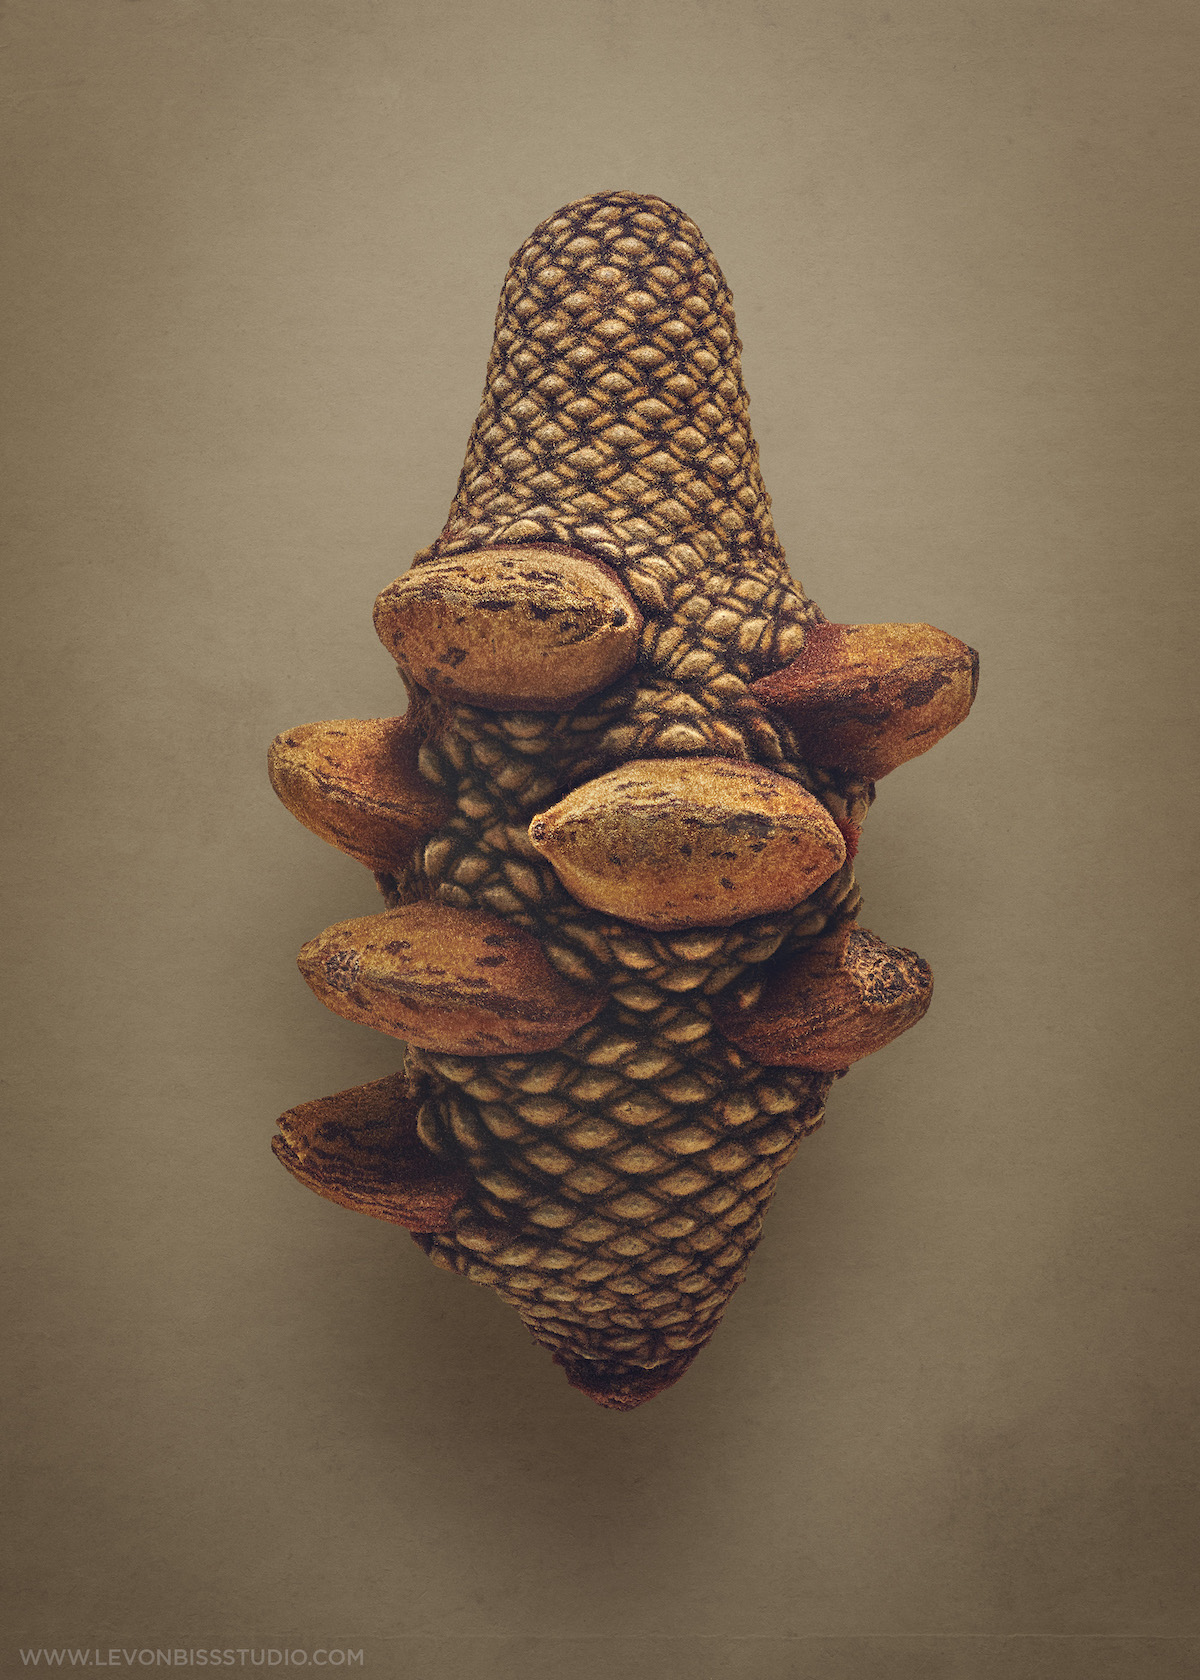 Dried Fruit Photographs